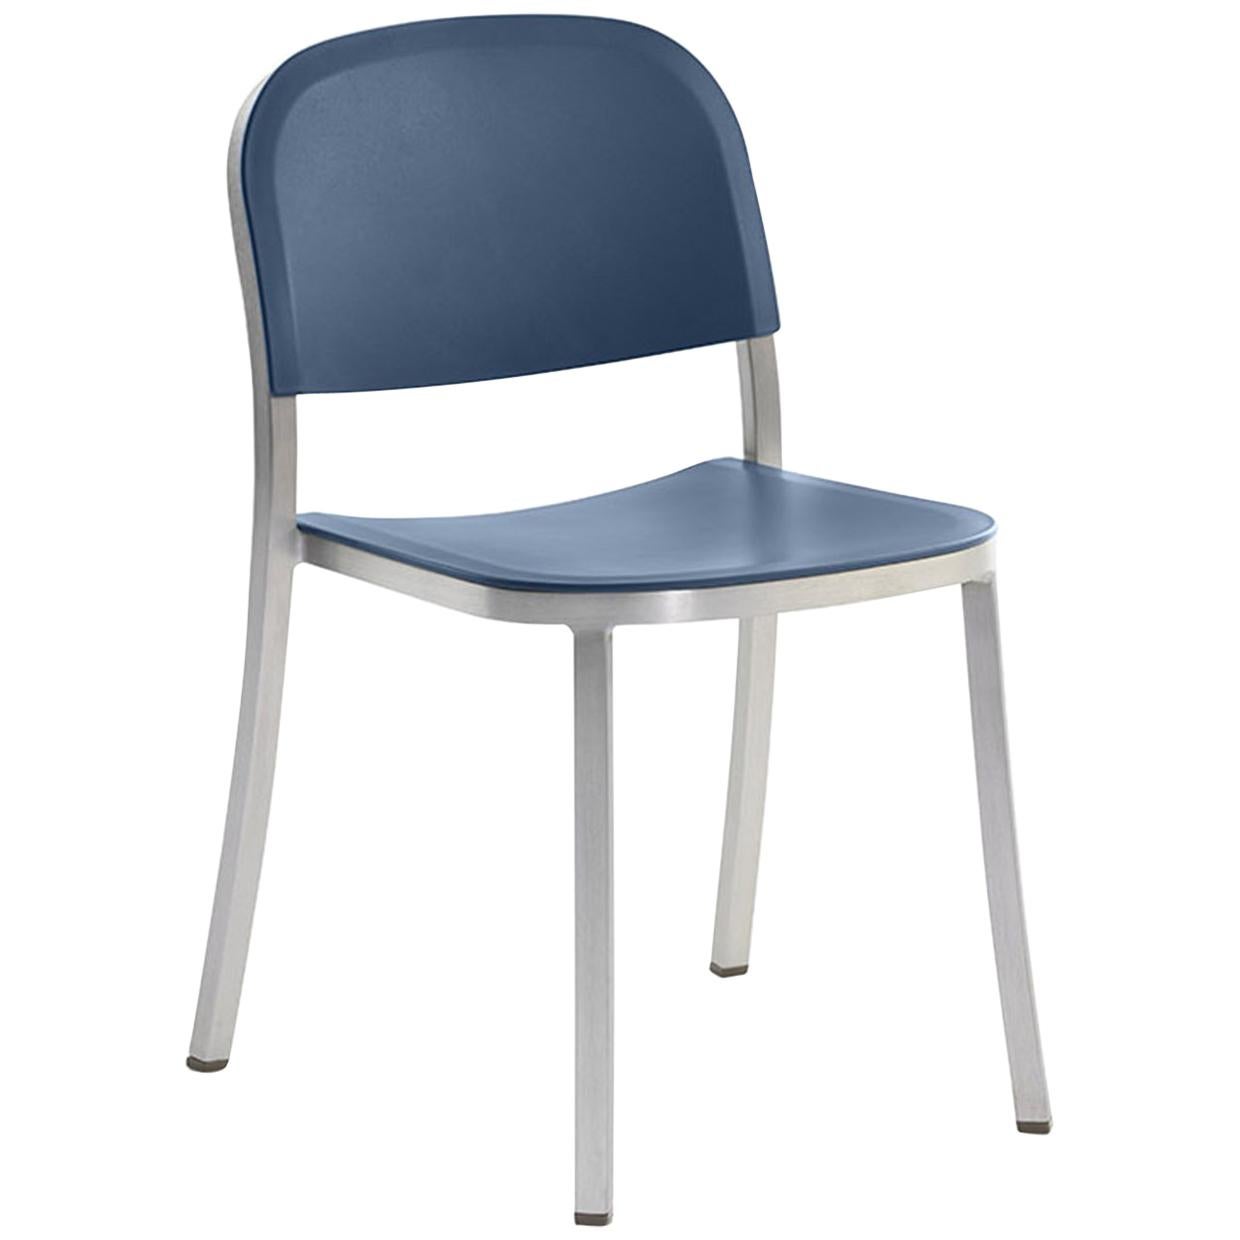 Emeco Stacking Chair in Brushed Aluminum & Blue by Jasper Morrison